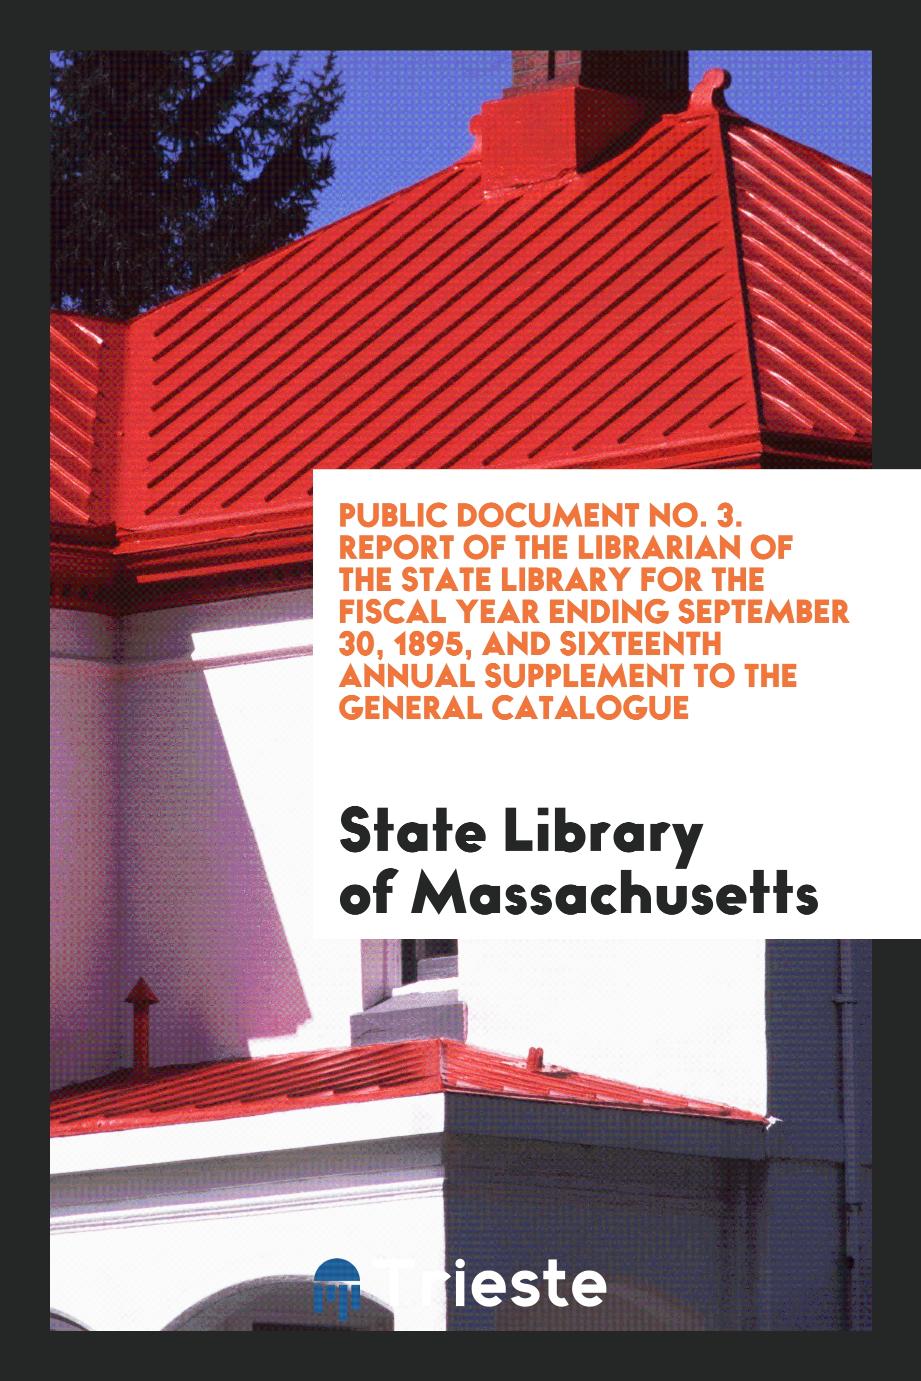 Public Document No. 3. Report of the Librarian of the State Library for the Fiscal Year Ending September 30, 1895, and Sixteenth Annual Supplement to the General Catalogue